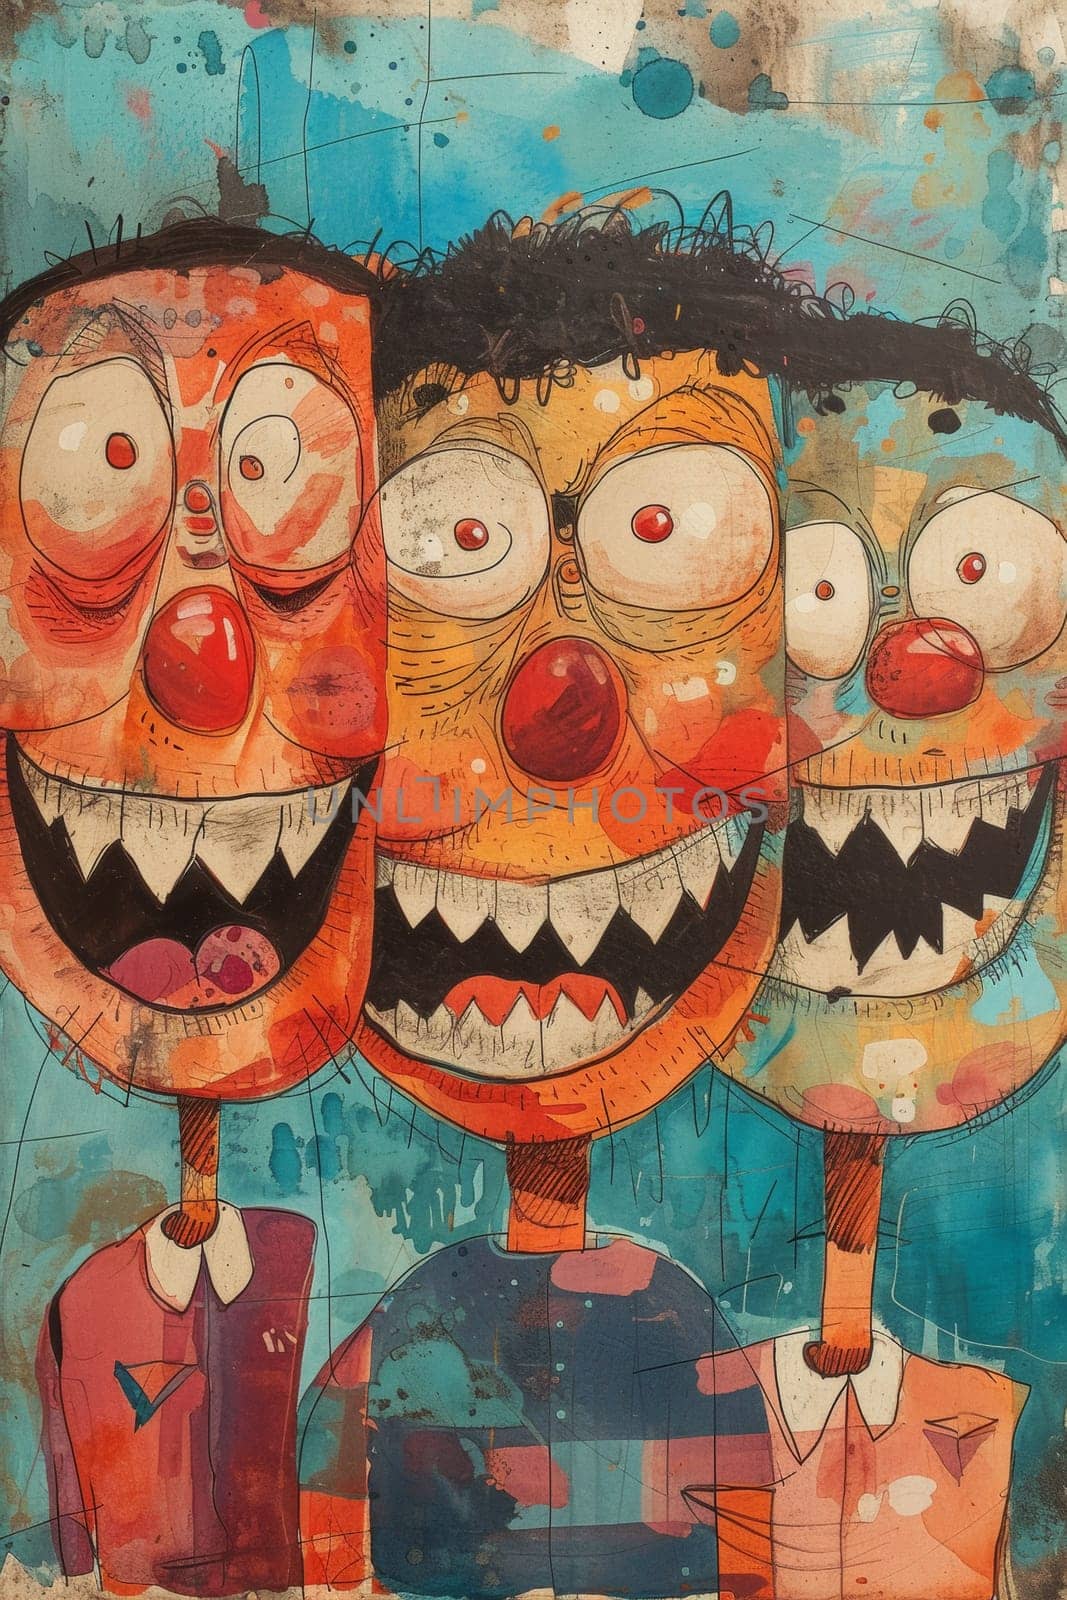 Three cartoon characters painted on a painting of an old man